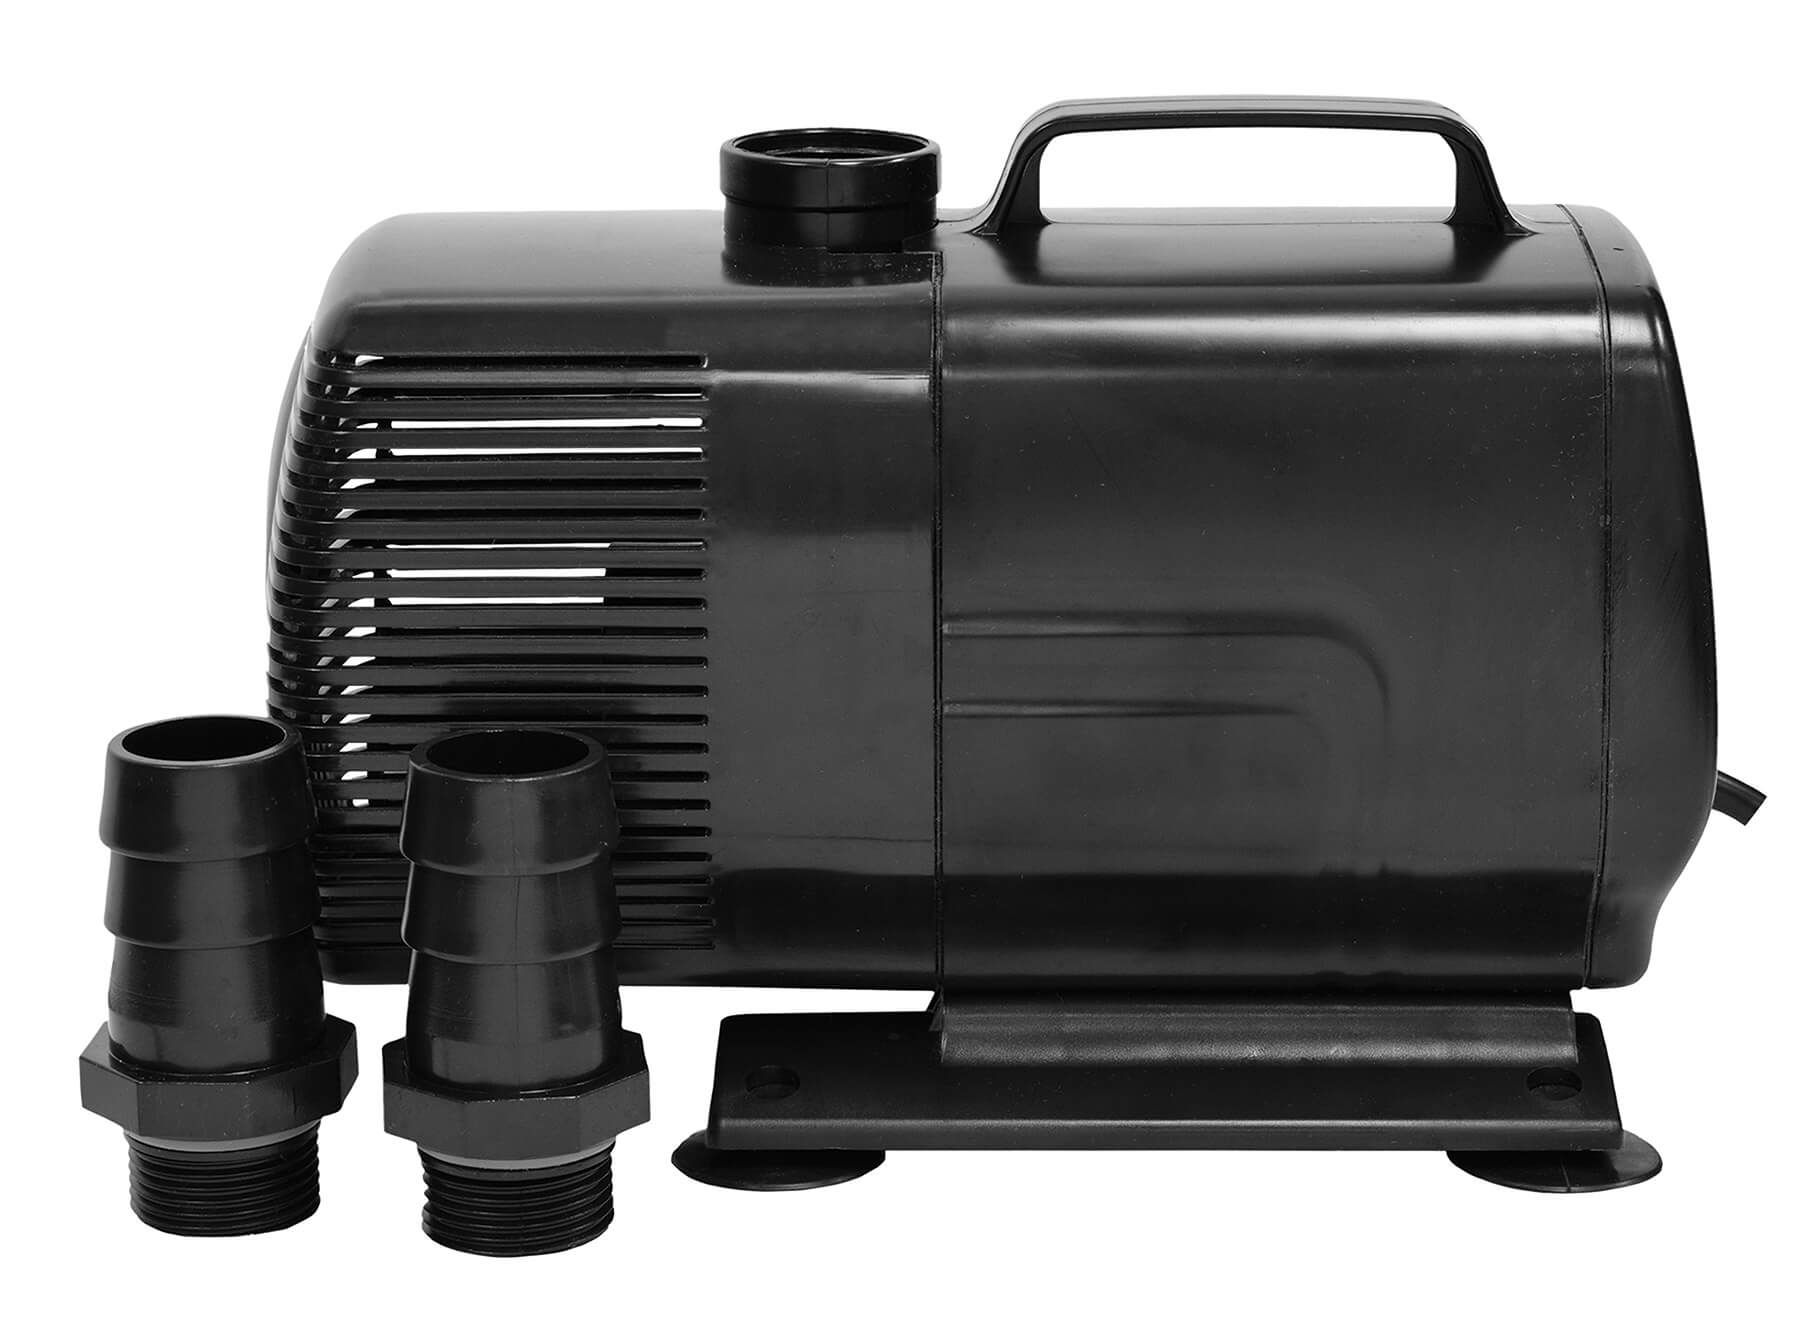 EasyPro Submersible Mag Drive Pond & Fountain Pumps 